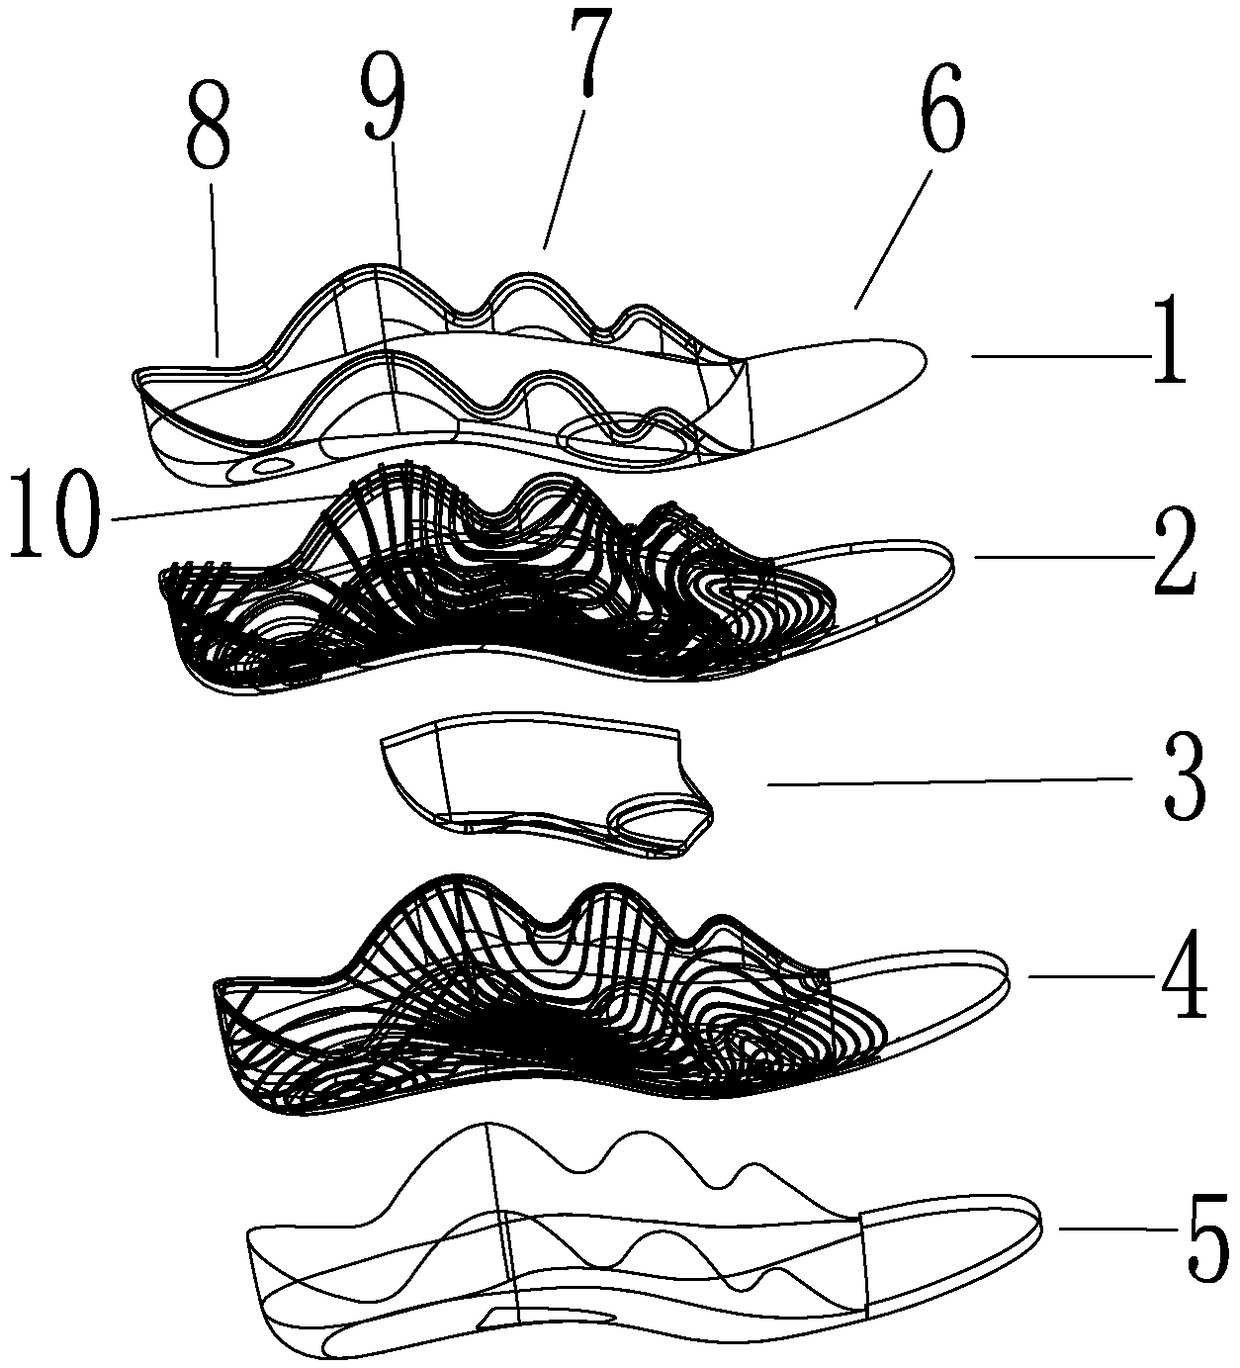 Sock-insole two-in-one insole